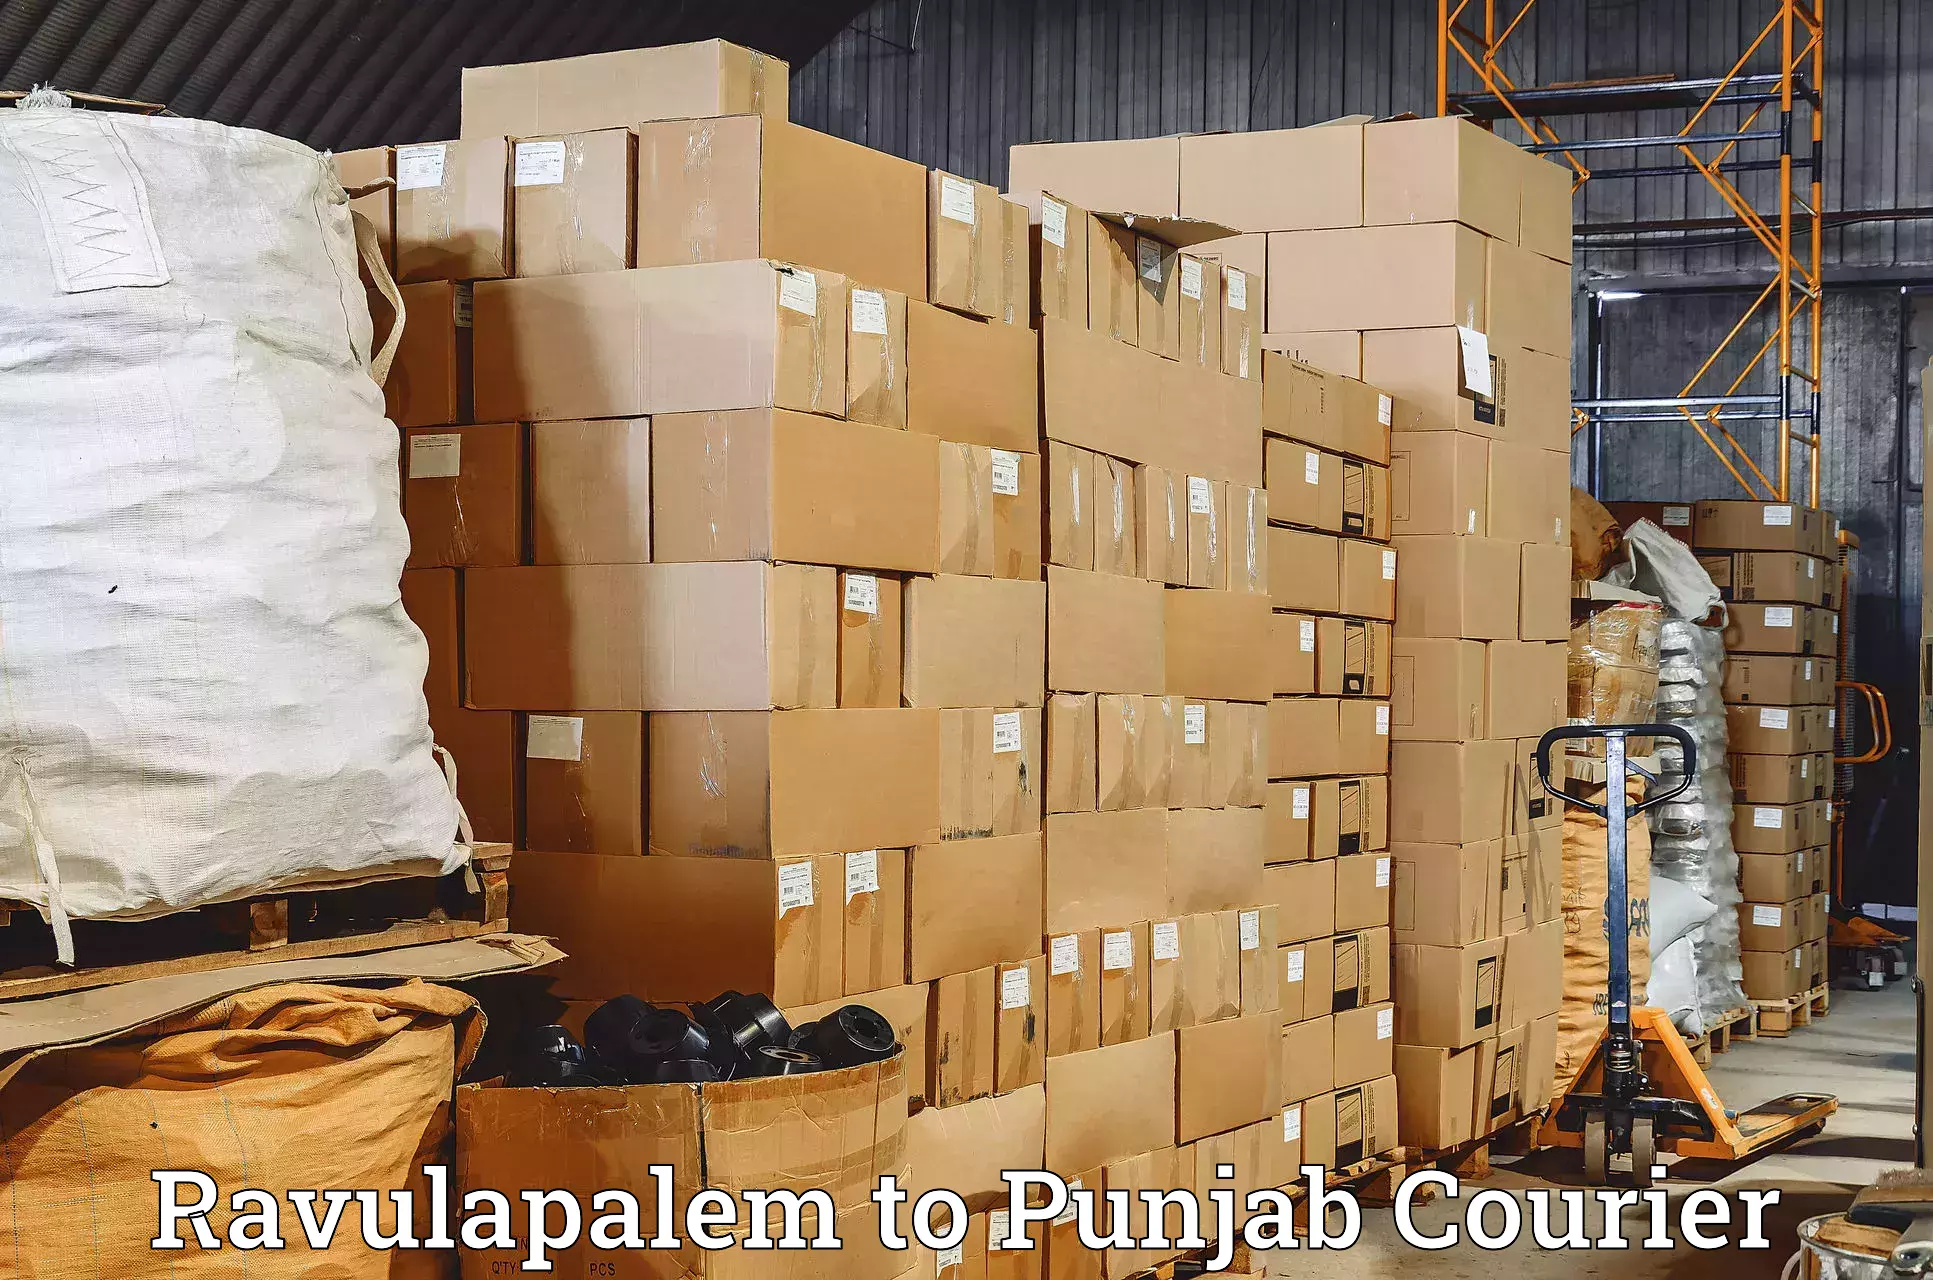 Tailored delivery services in Ravulapalem to Punjab